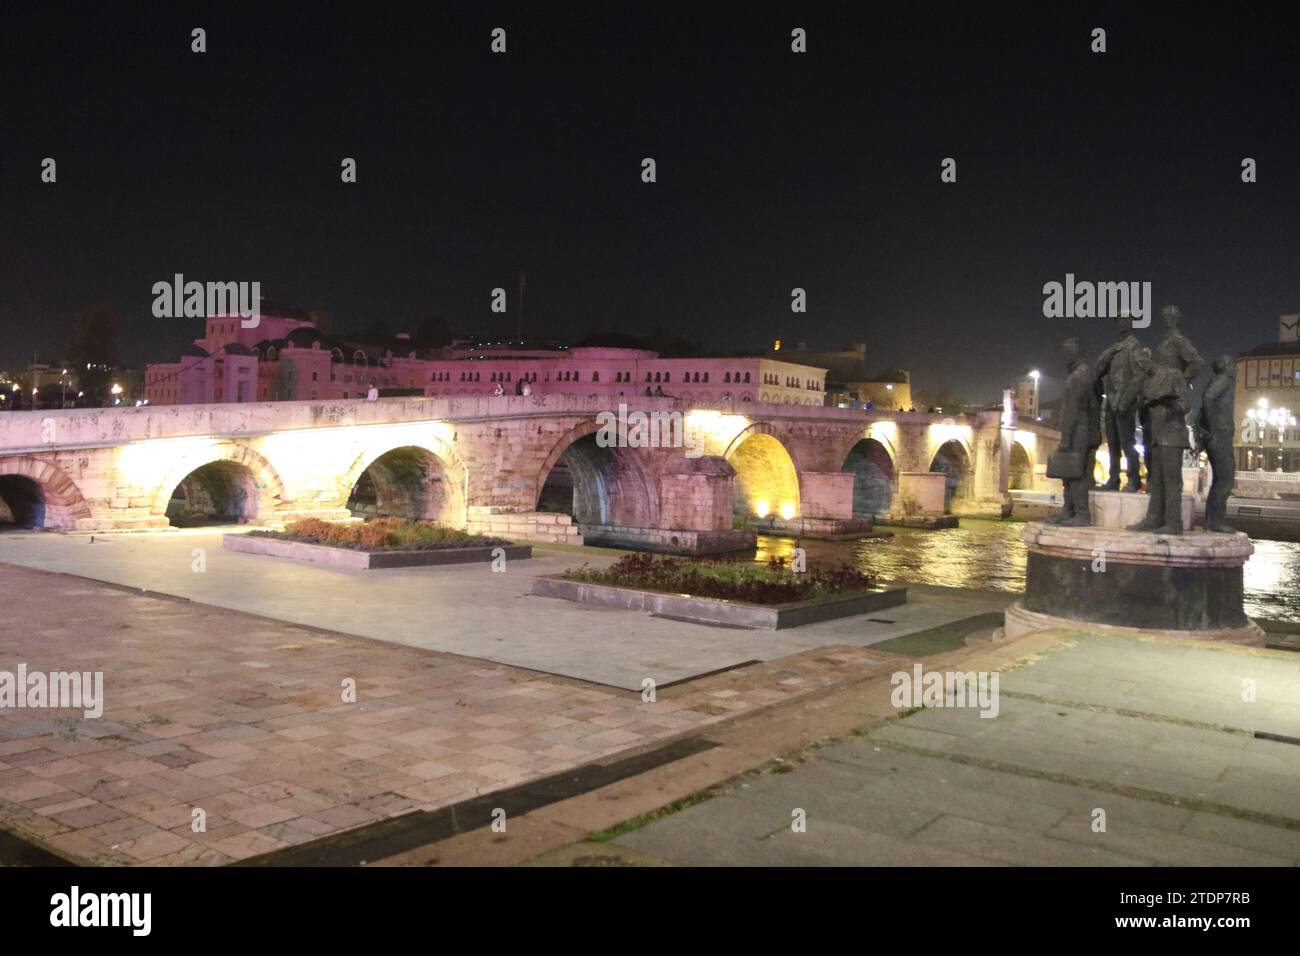 The famous Stone Bridge at nighttime in Skopje, with the Attentators of Solun & Gemidzhii Monument to the right (Boatmen of Thessaloniki). The bridge goes over the Vardar River. Stock Photo